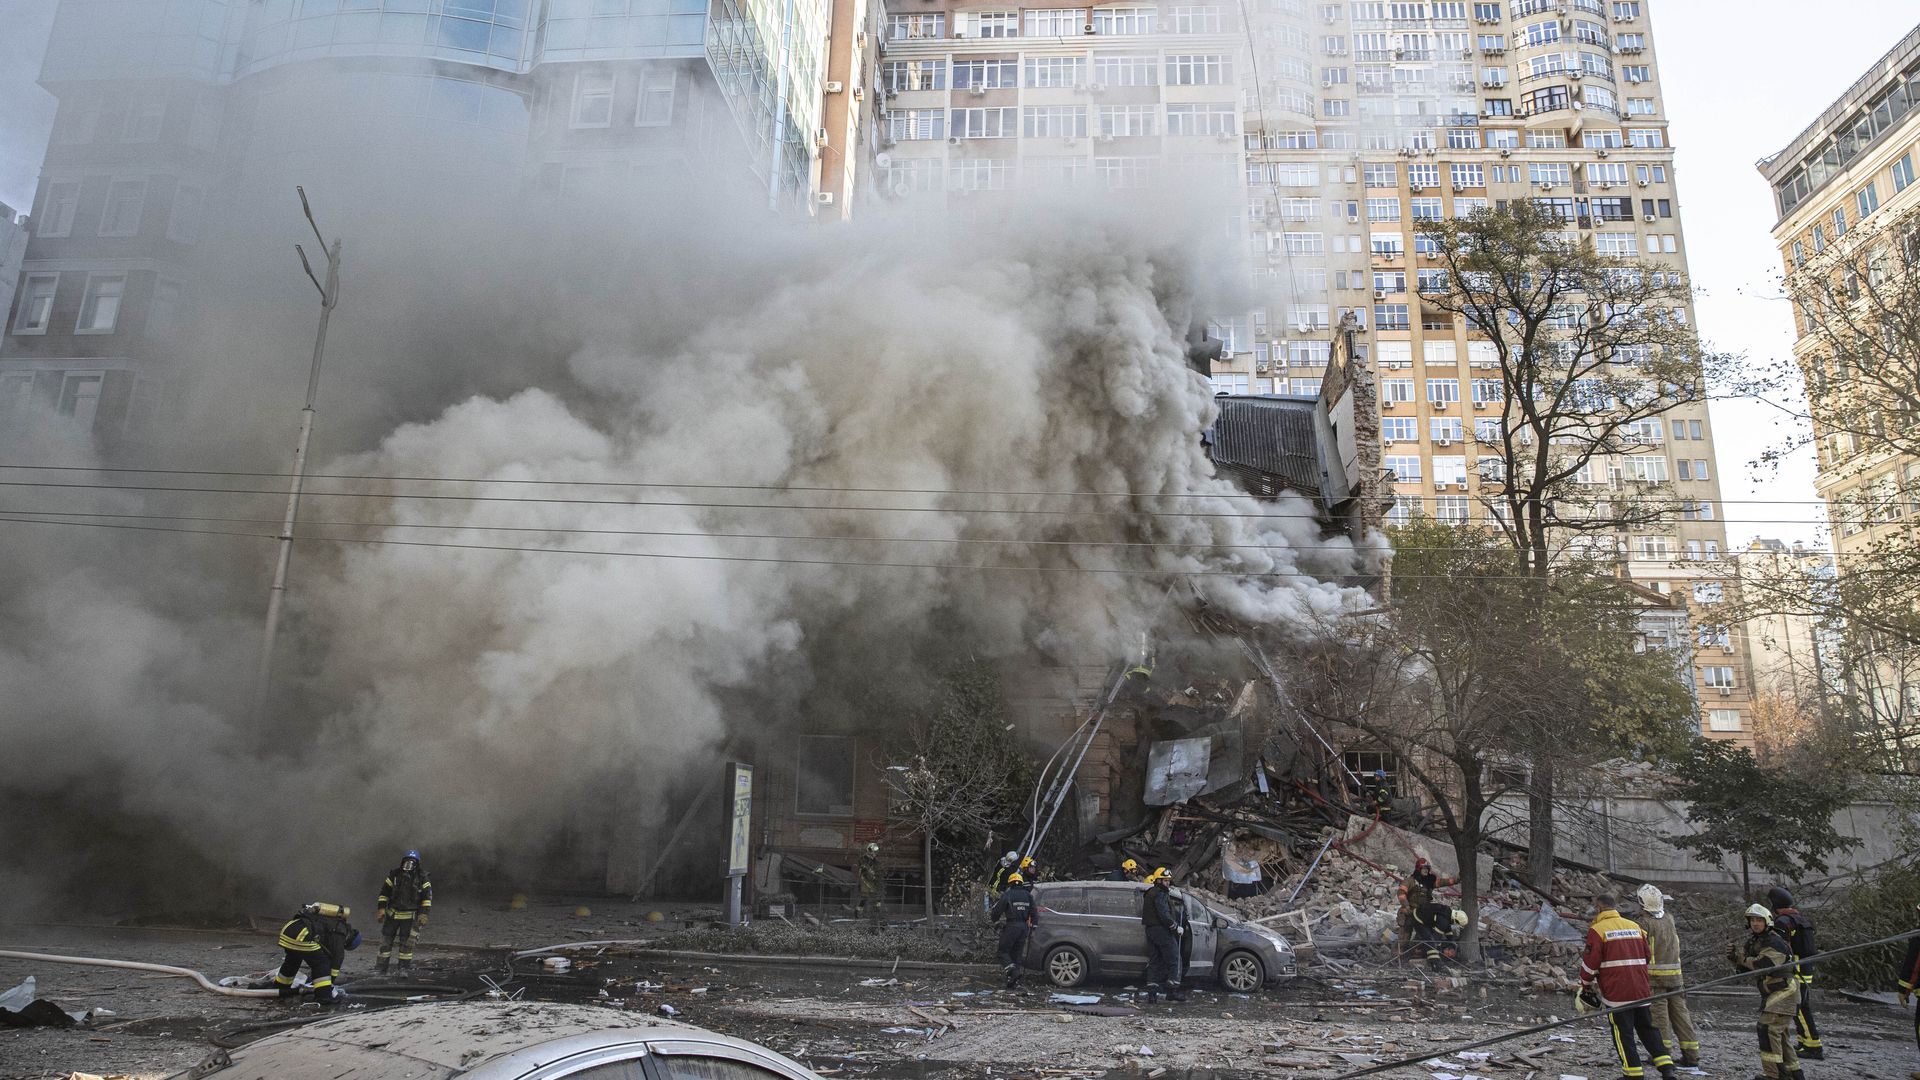  Firefighters conduct work in a destroyed building after Russian attacks in Kyiv, Ukraine on October 17.